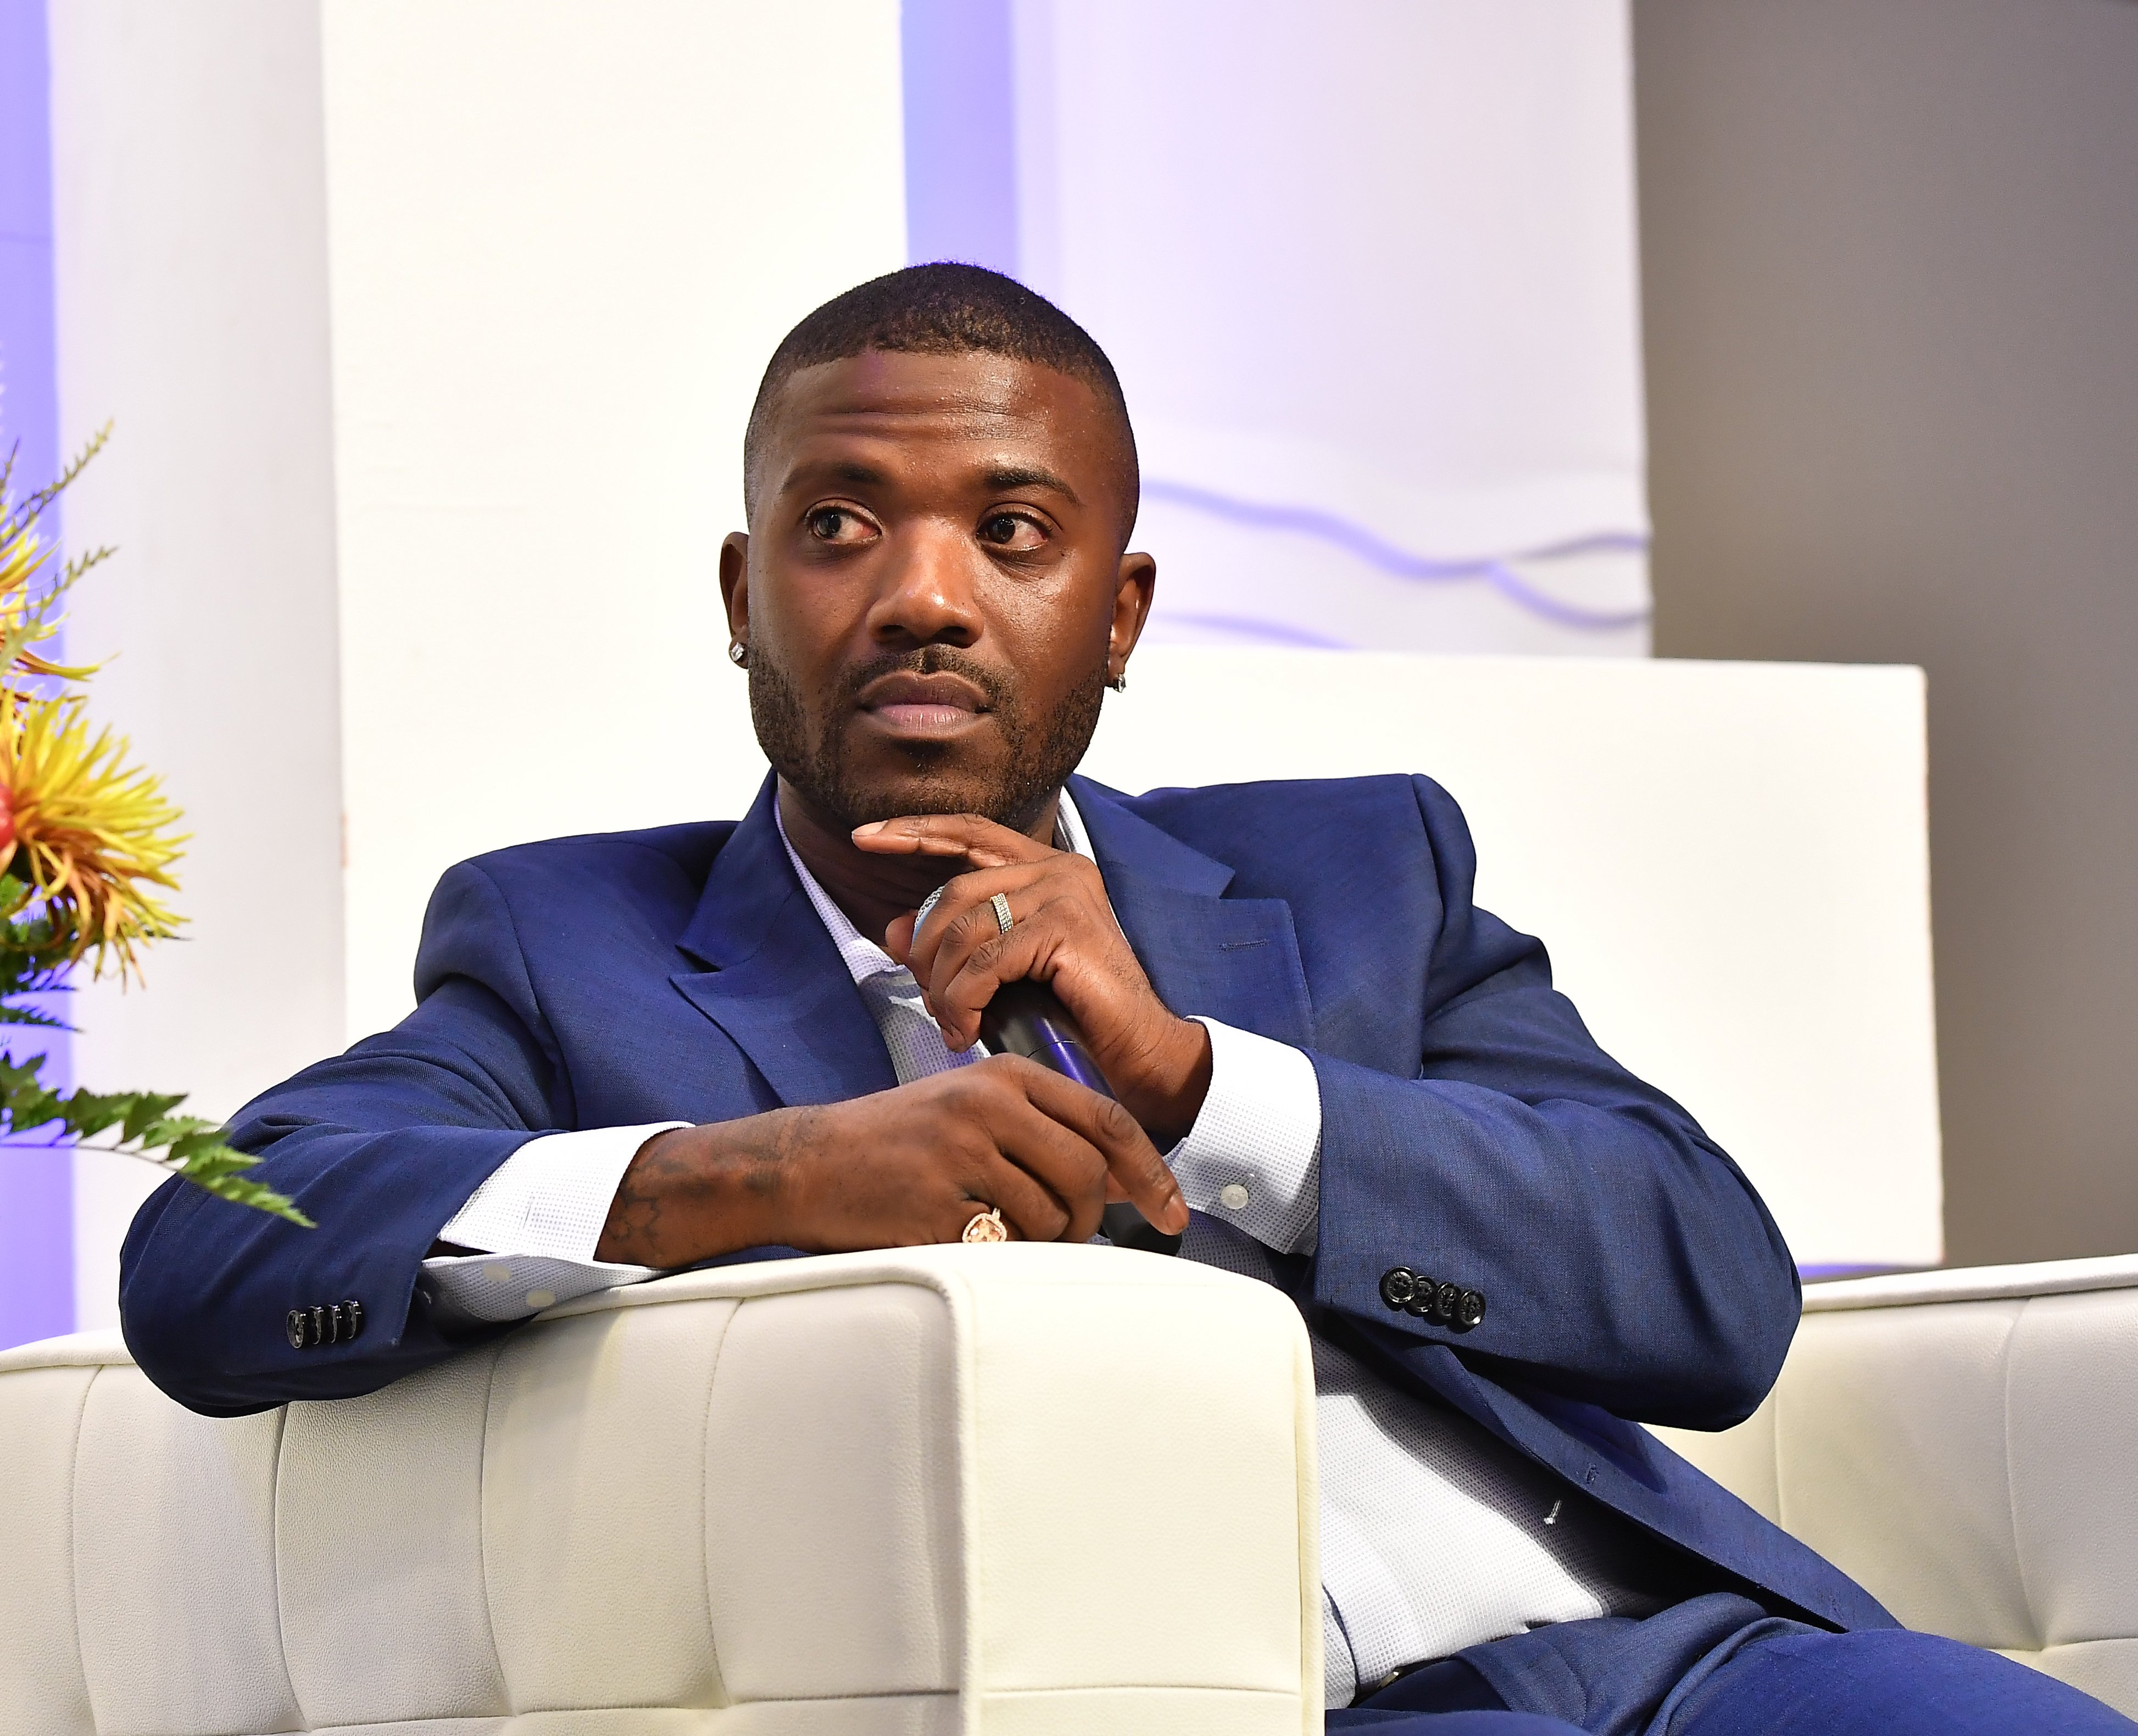 Singer/television personality Ray J speaks onstage during RollingOut 2018 Ride Conference at Loudermilk Conference Center on September 28, 2018 | Photo: Getty Images